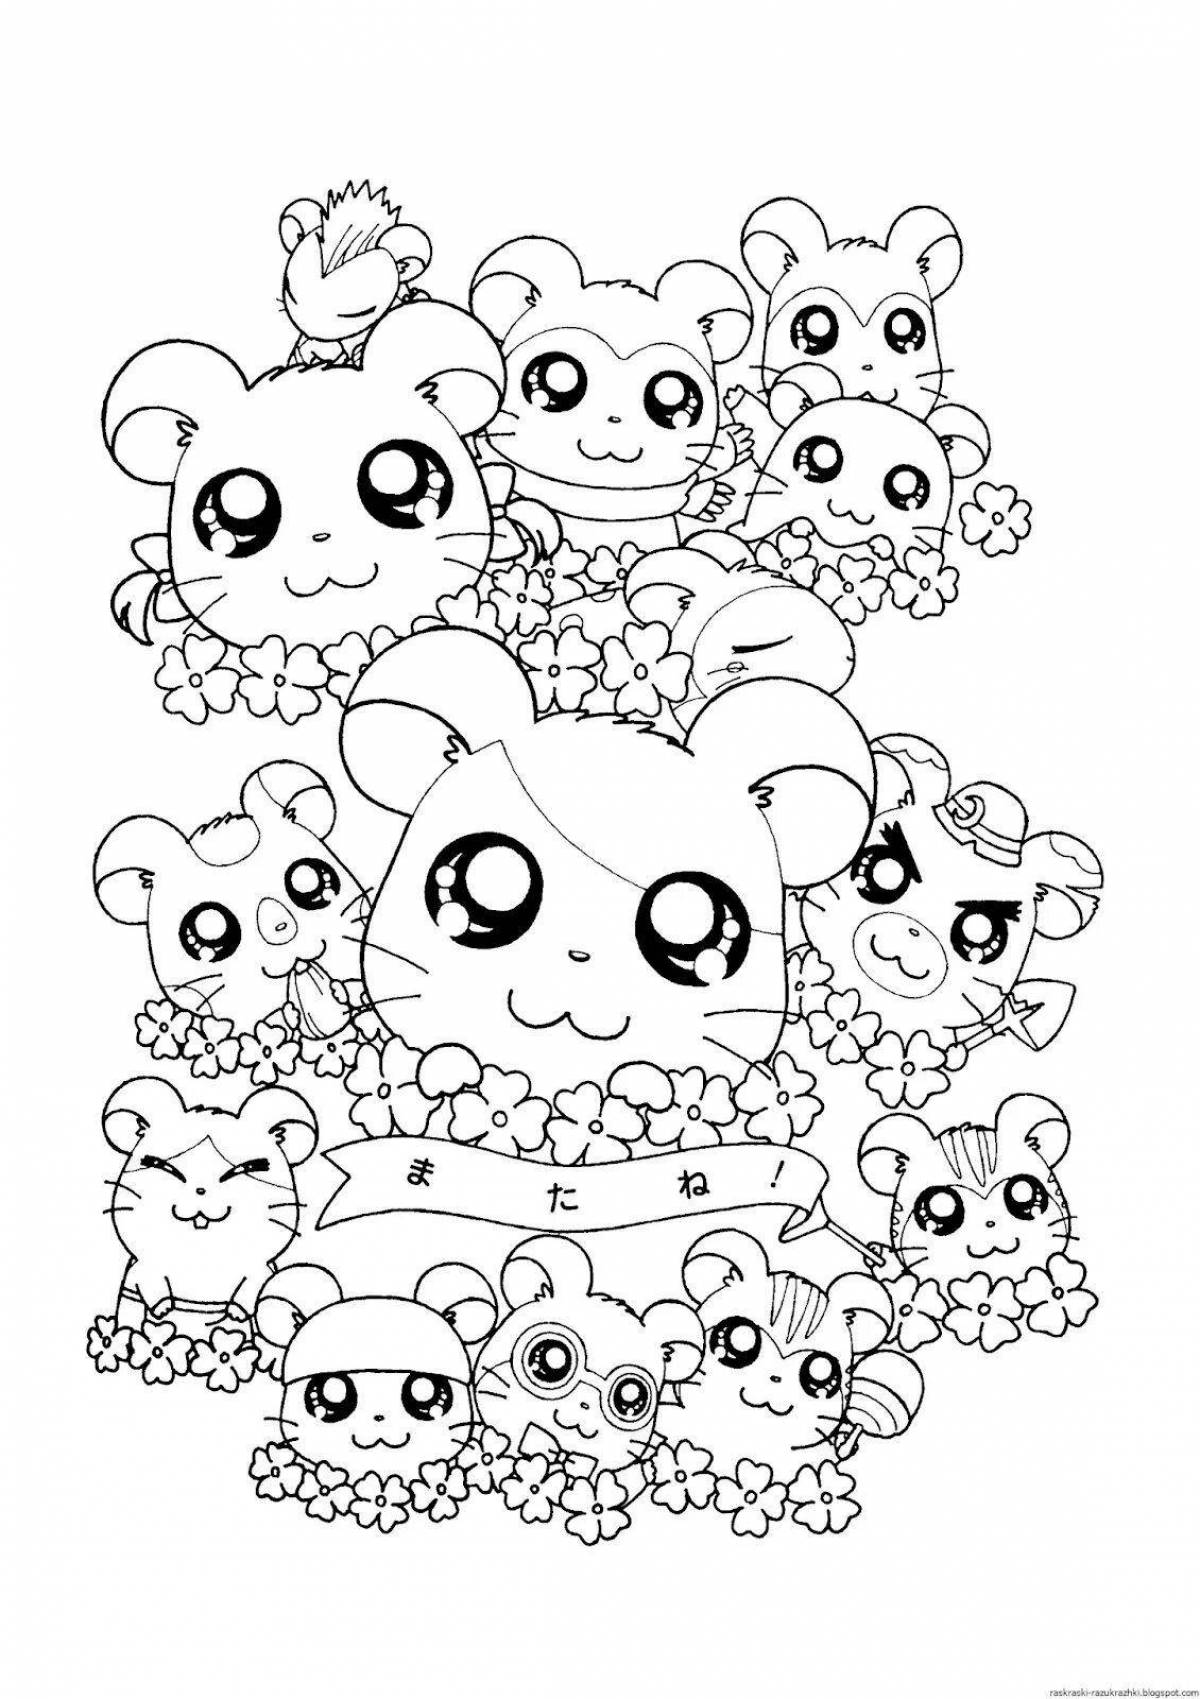 Wonderful coloring pages for girls cute fluffies